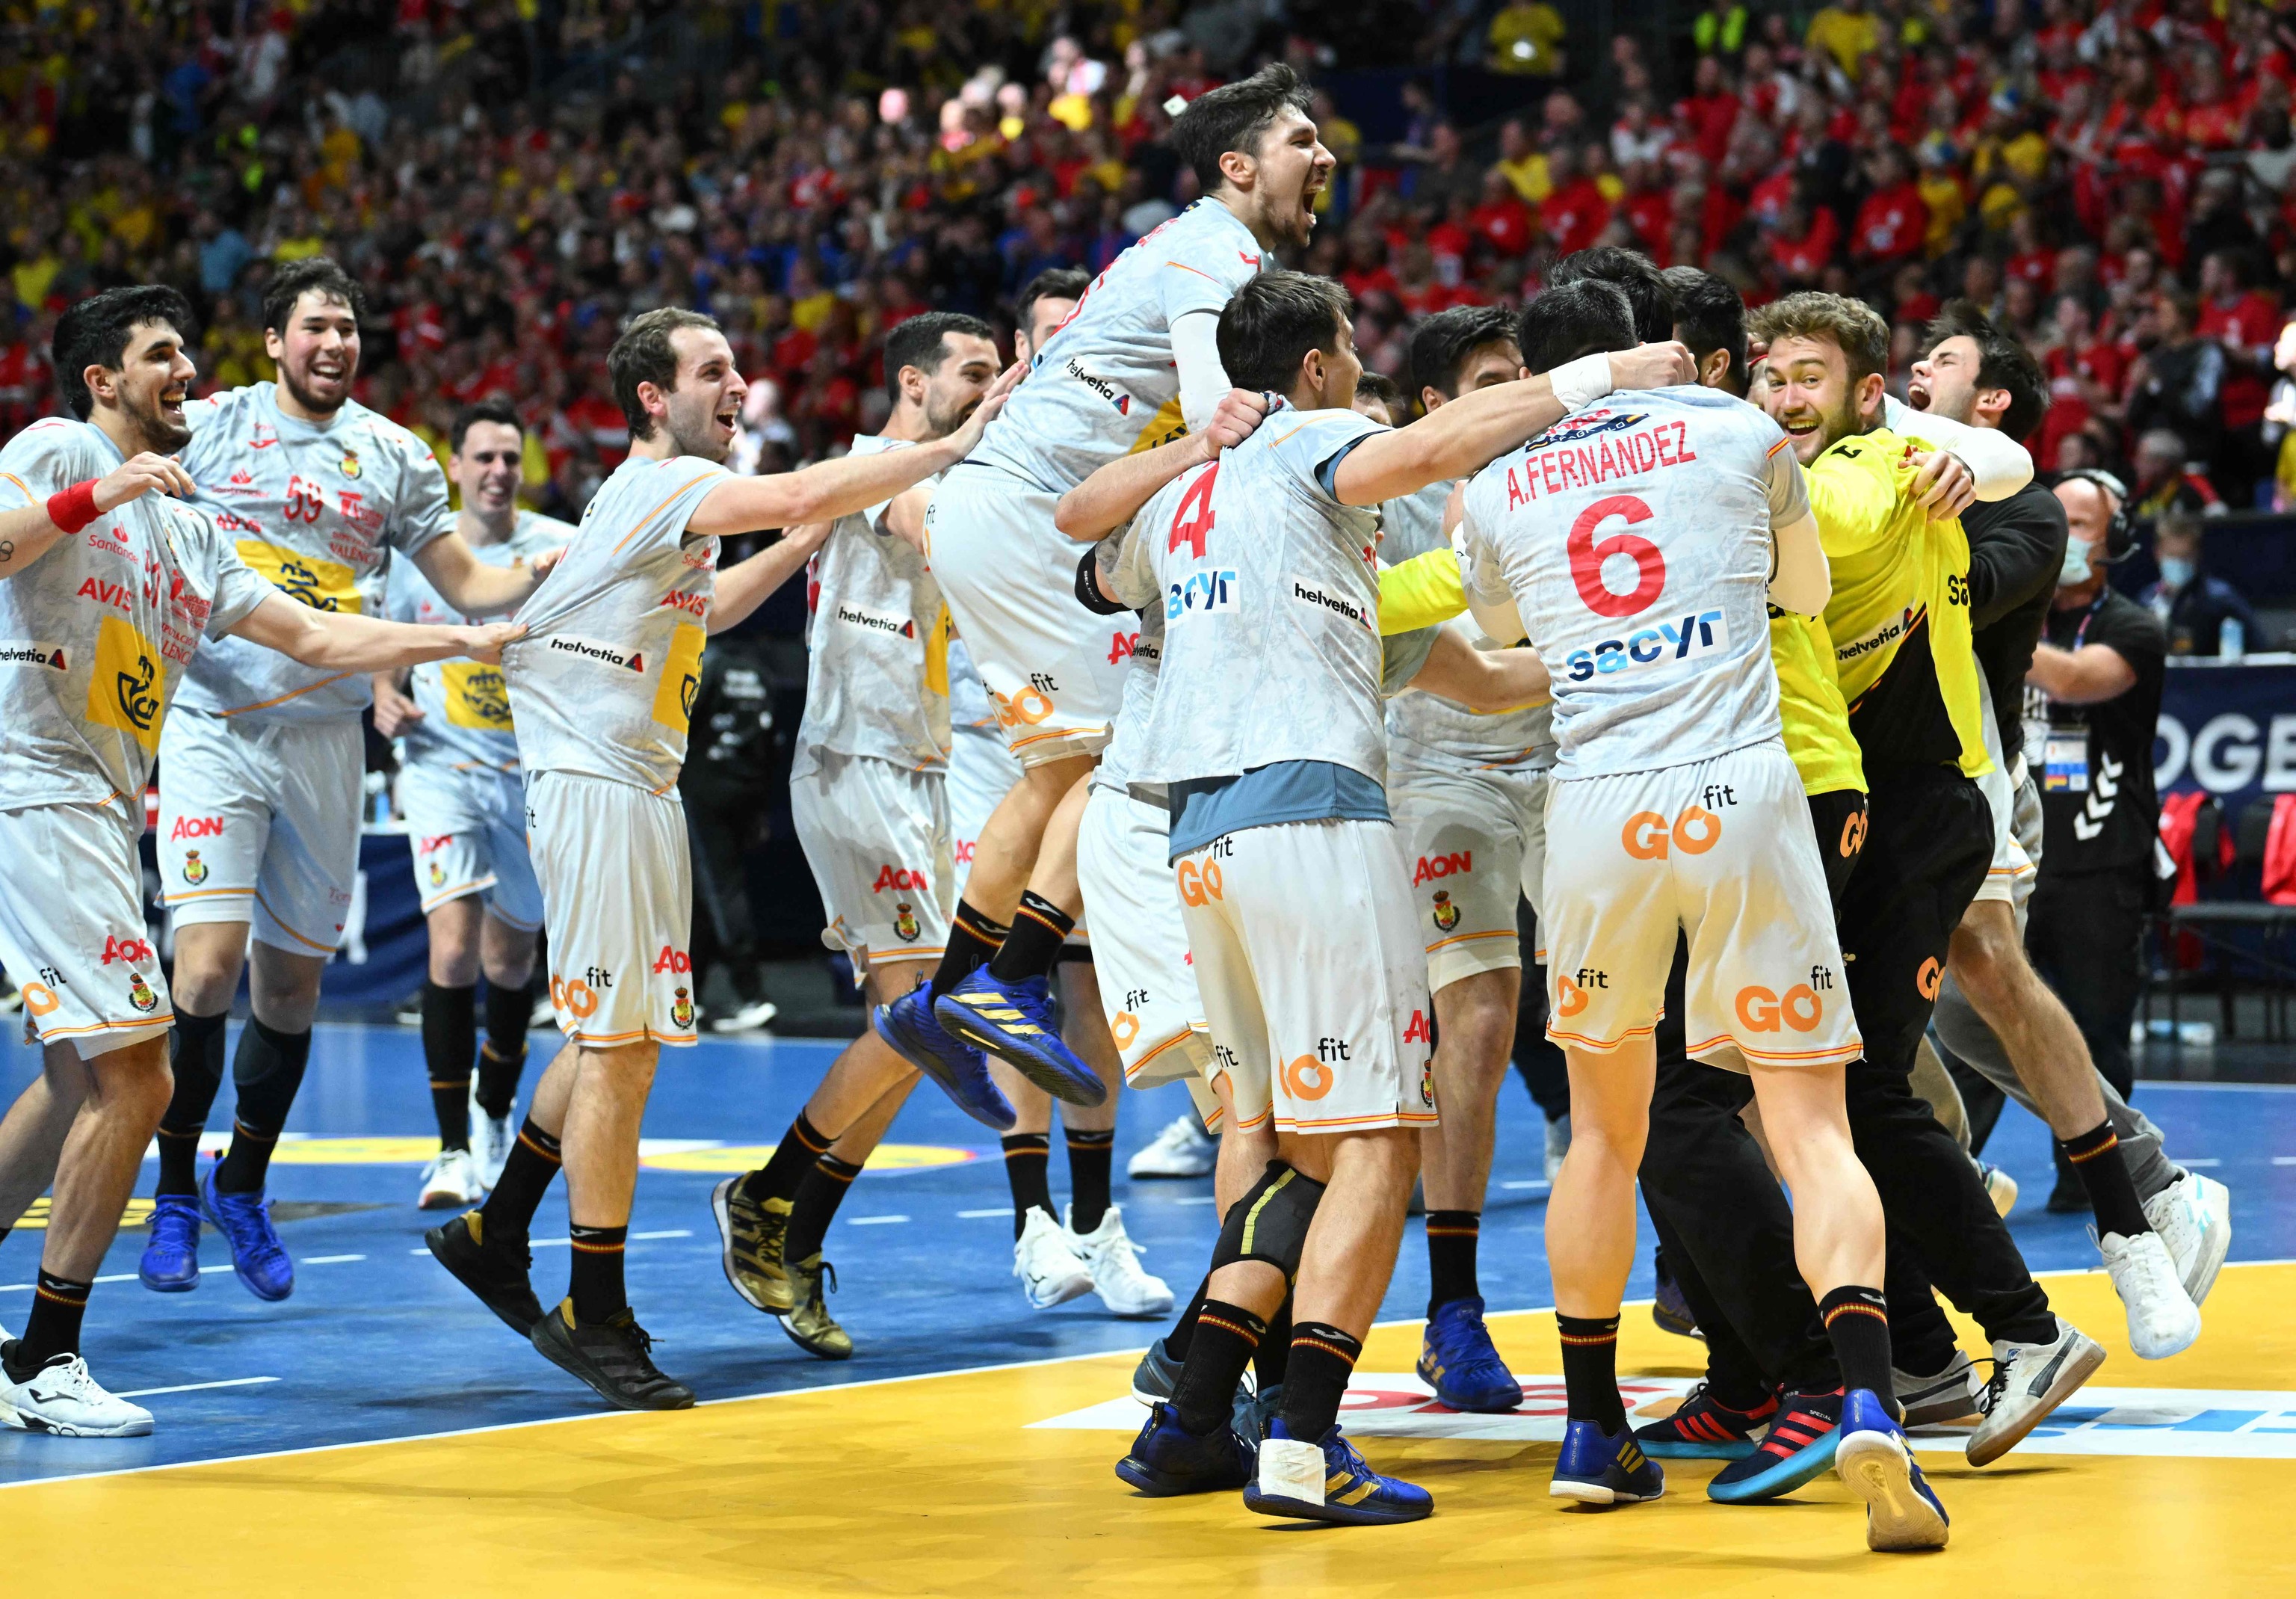 Spain's players react after the final whistle of the Men's IHF World  lt;HIT gt;Handball lt;/HIT gt; Championship third place match between Sweden and Spain in Stockholm on January 29, 2023. (Photo by Jonathan NACKSTRAND / AFP)